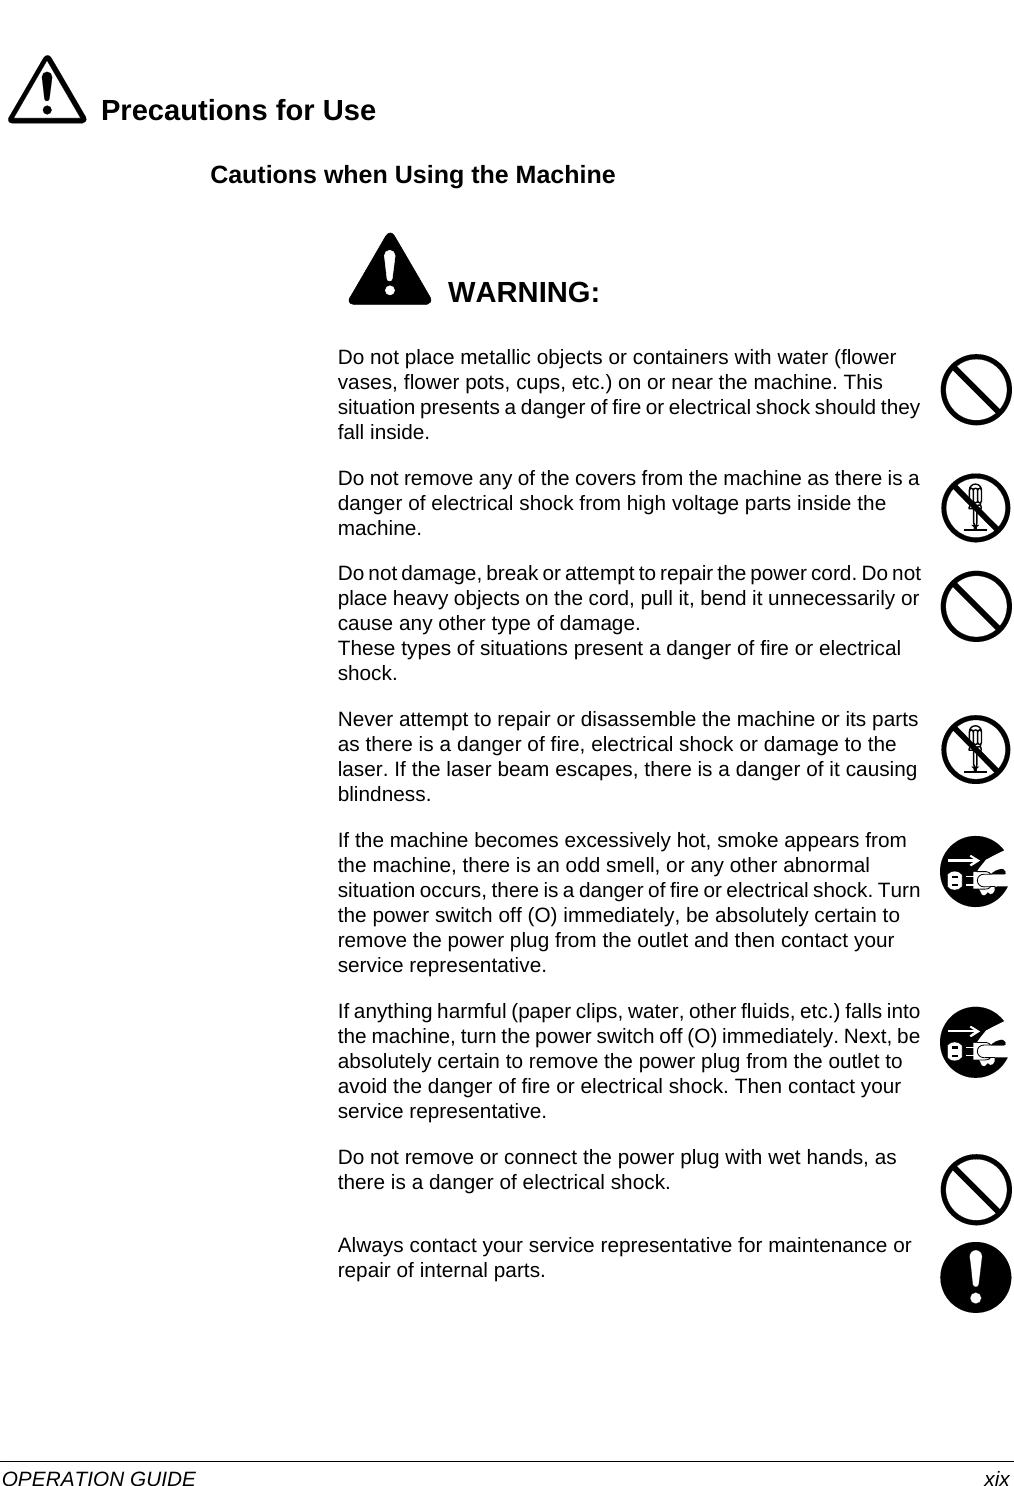  OPERATION GUIDE xixPrecautions for UseCautions when Using the Machine WARNING:Do not place metallic objects or containers with water (flower vases, flower pots, cups, etc.) on or near the machine. This situation presents a danger of fire or electrical shock should they fall inside.Do not remove any of the covers from the machine as there is a danger of electrical shock from high voltage parts inside the machine. Do not damage, break or attempt to repair the power cord. Do not place heavy objects on the cord, pull it, bend it unnecessarily or cause any other type of damage. These types of situations present a danger of fire or electrical shock. Never attempt to repair or disassemble the machine or its parts as there is a danger of fire, electrical shock or damage to the laser. If the laser beam escapes, there is a danger of it causing blindness.If the machine becomes excessively hot, smoke appears from the machine, there is an odd smell, or any other abnormal situation occurs, there is a danger of fire or electrical shock. Turn the power switch off (O) immediately, be absolutely certain to remove the power plug from the outlet and then contact your service representative.If anything harmful (paper clips, water, other fluids, etc.) falls into the machine, turn the power switch off (O) immediately. Next, be absolutely certain to remove the power plug from the outlet to avoid the danger of fire or electrical shock. Then contact your service representative.Do not remove or connect the power plug with wet hands, as there is a danger of electrical shock. Always contact your service representative for maintenance or repair of internal parts.